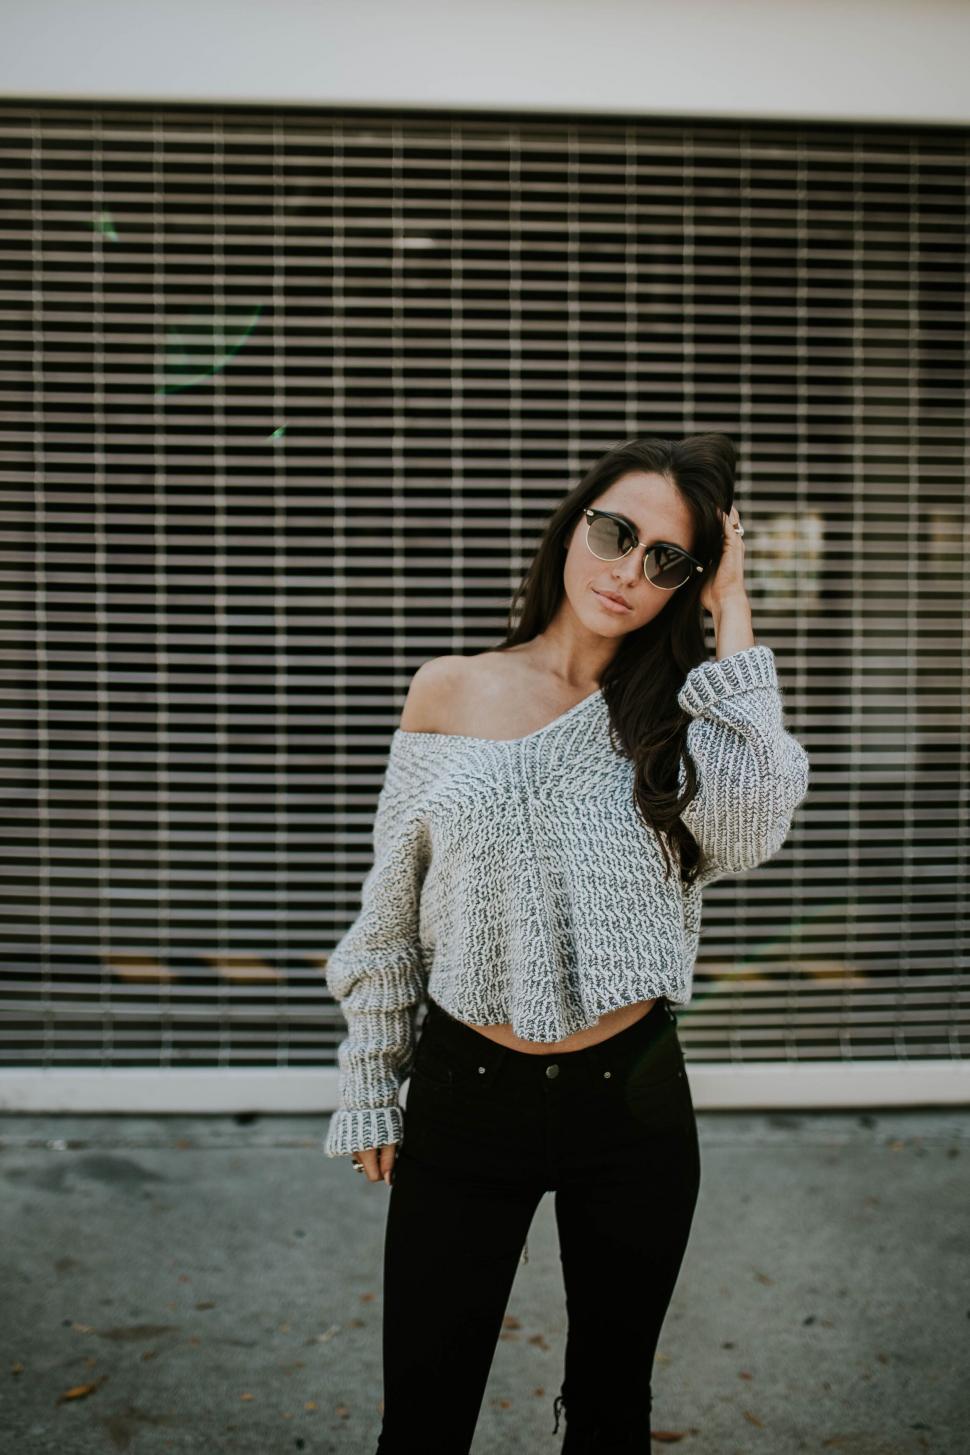 Free Image of Casual woman posing with sunglasses 